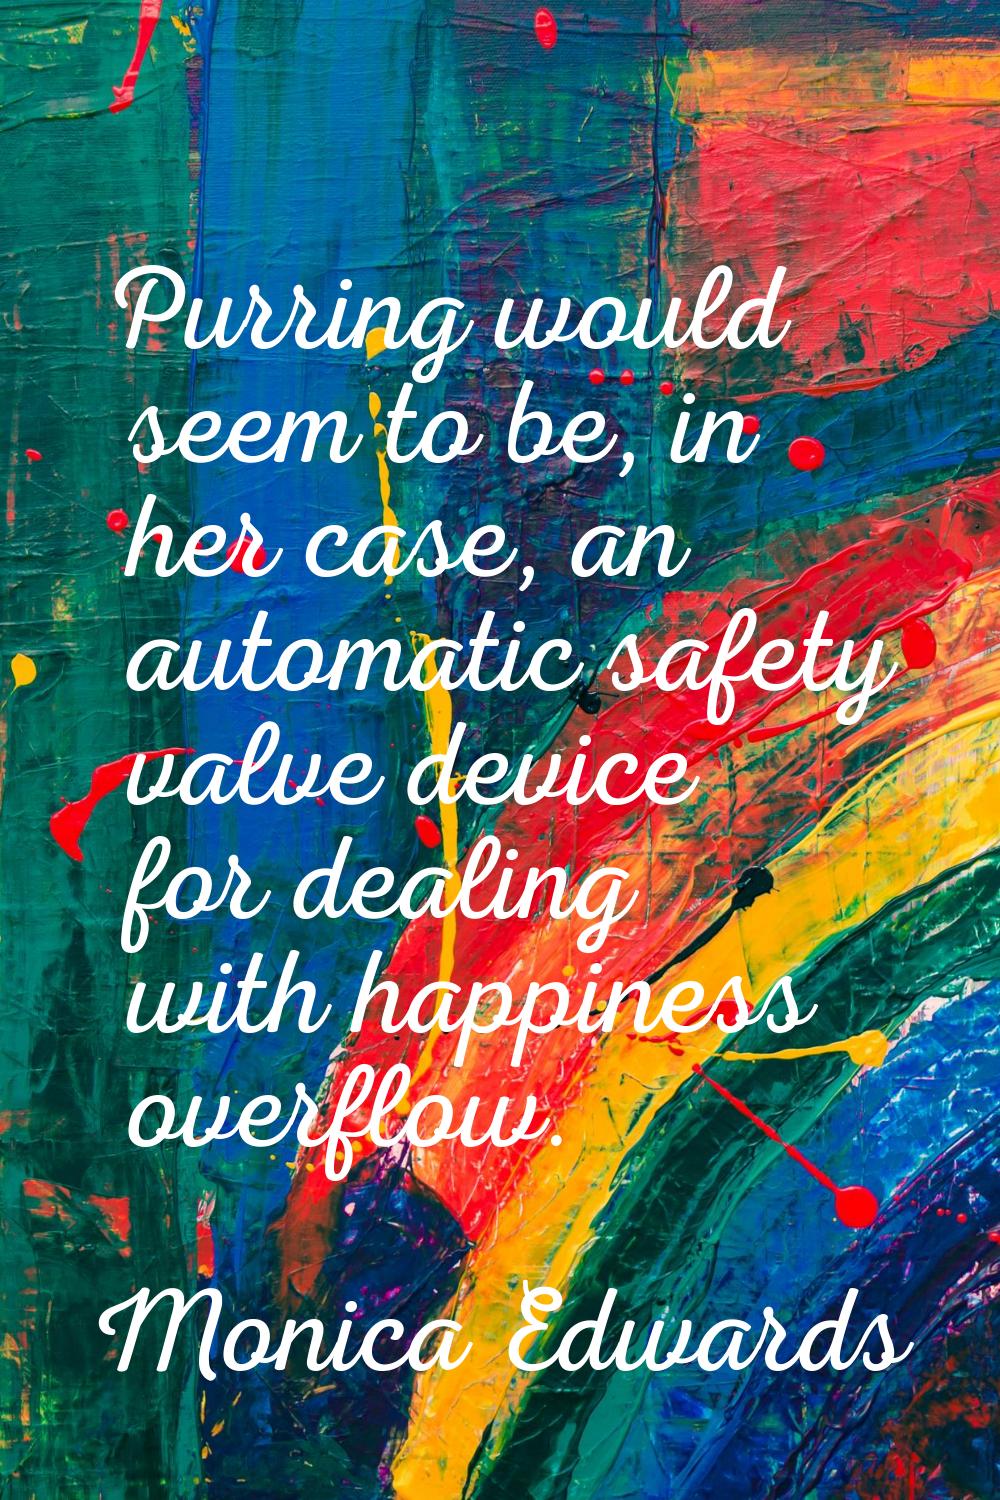 Purring would seem to be, in her case, an automatic safety valve device for dealing with happiness 